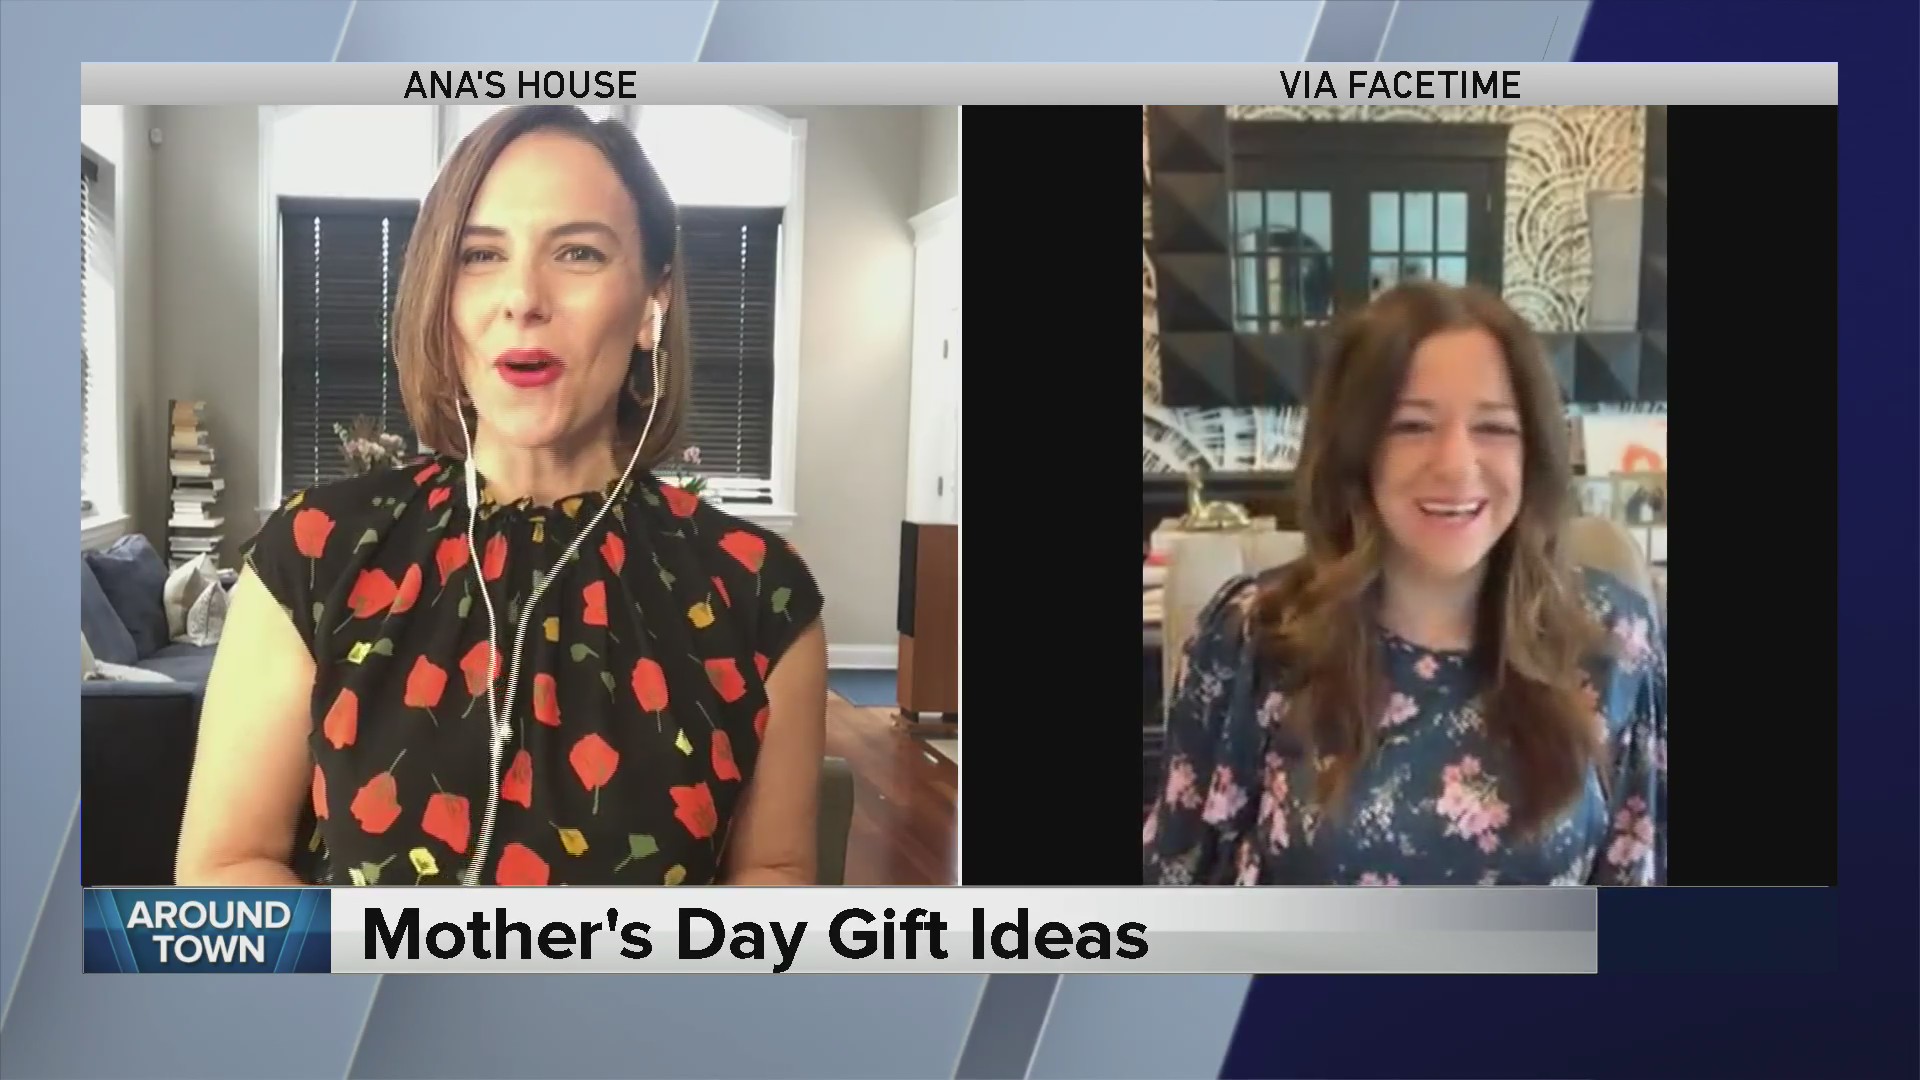 Around ‘The House’ checks out some Mother’s Day gift ideas